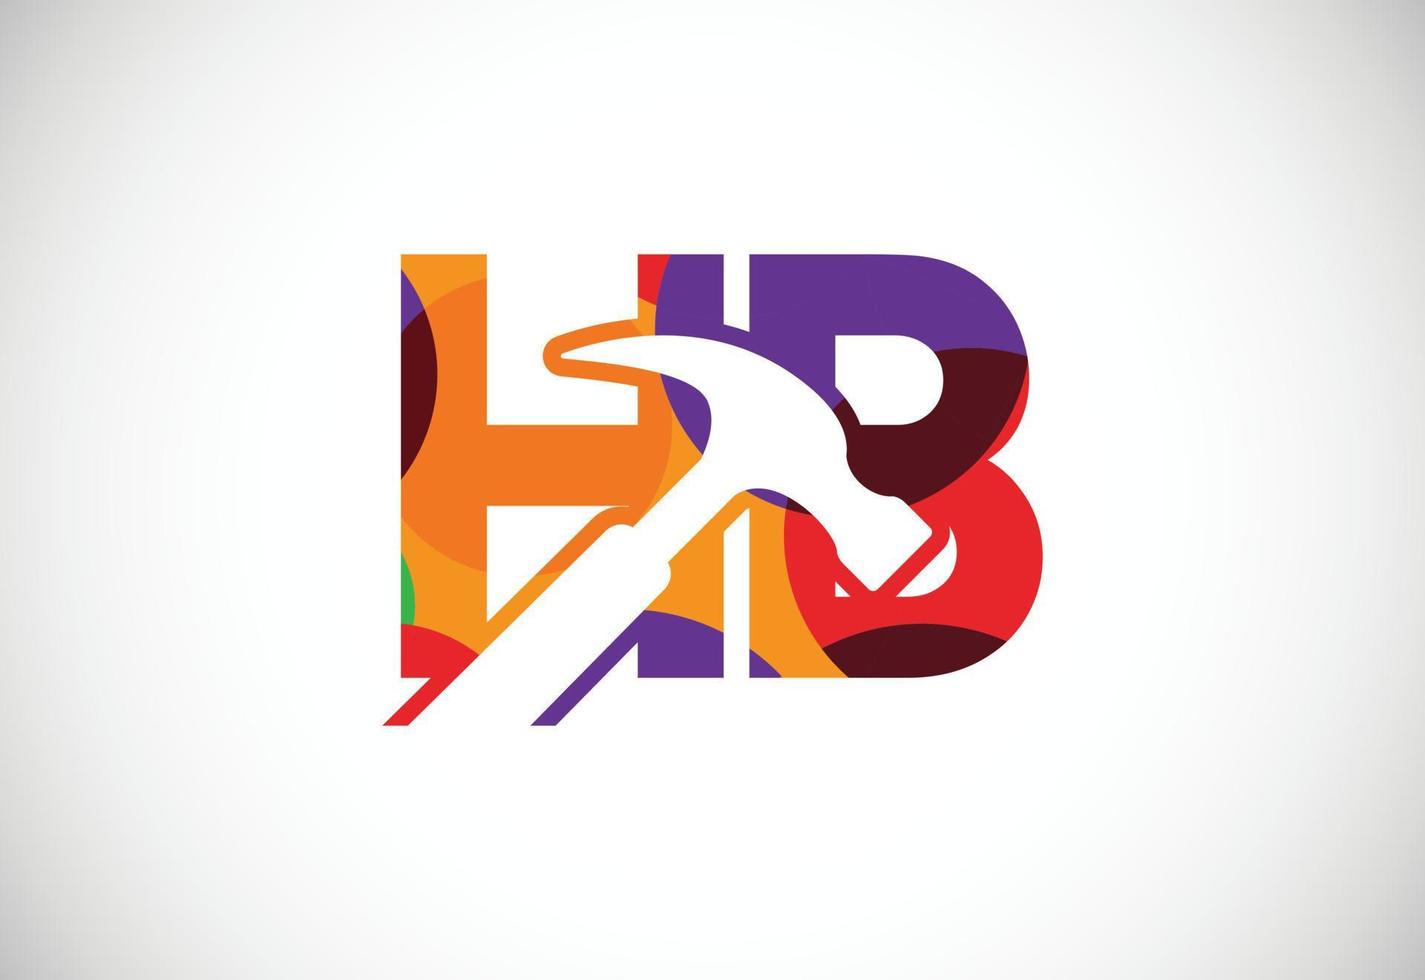 Colorful letter H B logo design vector. Modern logo for business company visual identity in low poly art style vector